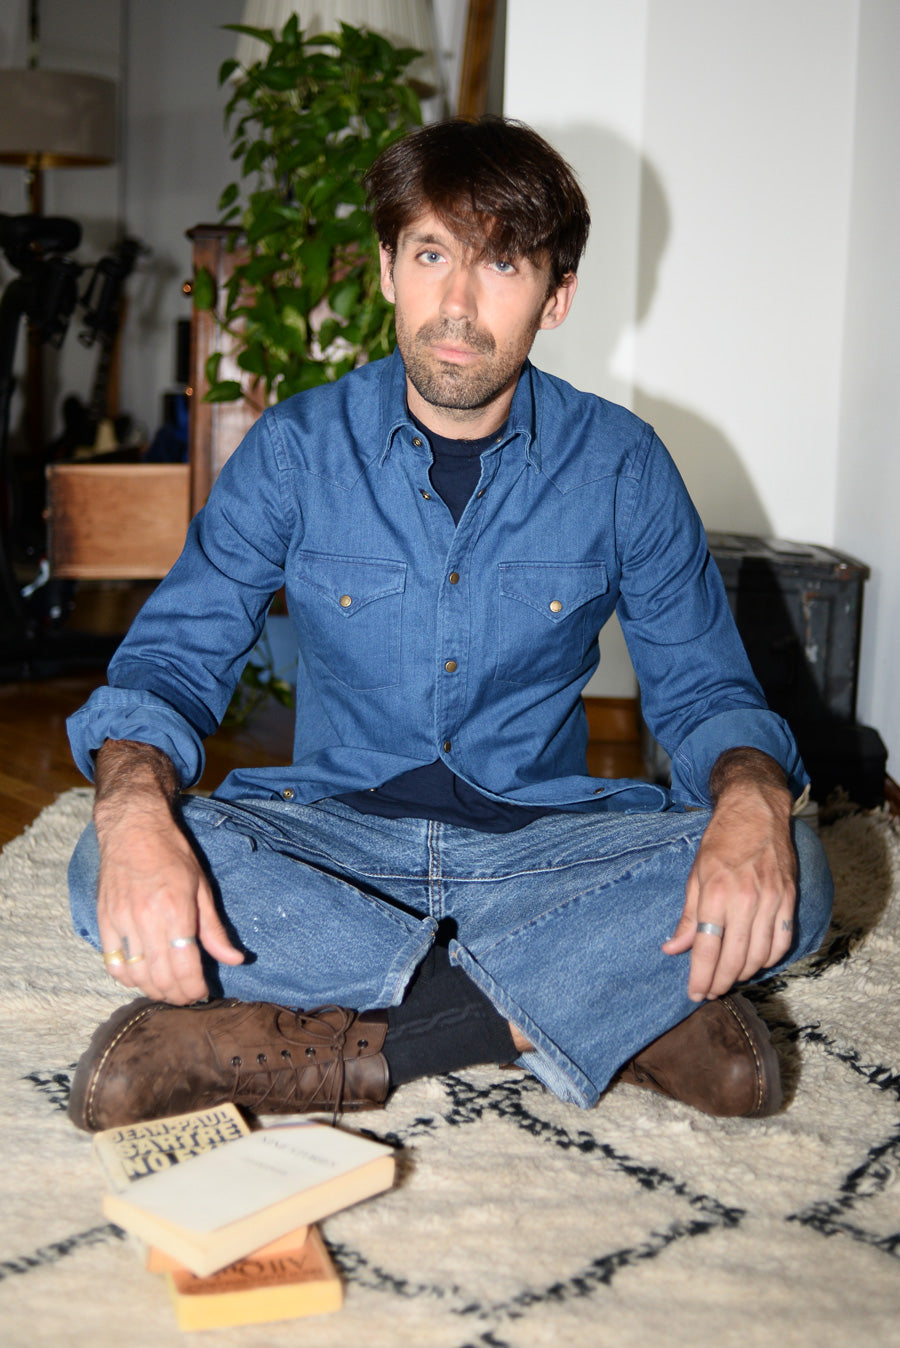 Dylan sits crossed-legged wearing jeans, a navy t-shirt, and a chambray western shirt.